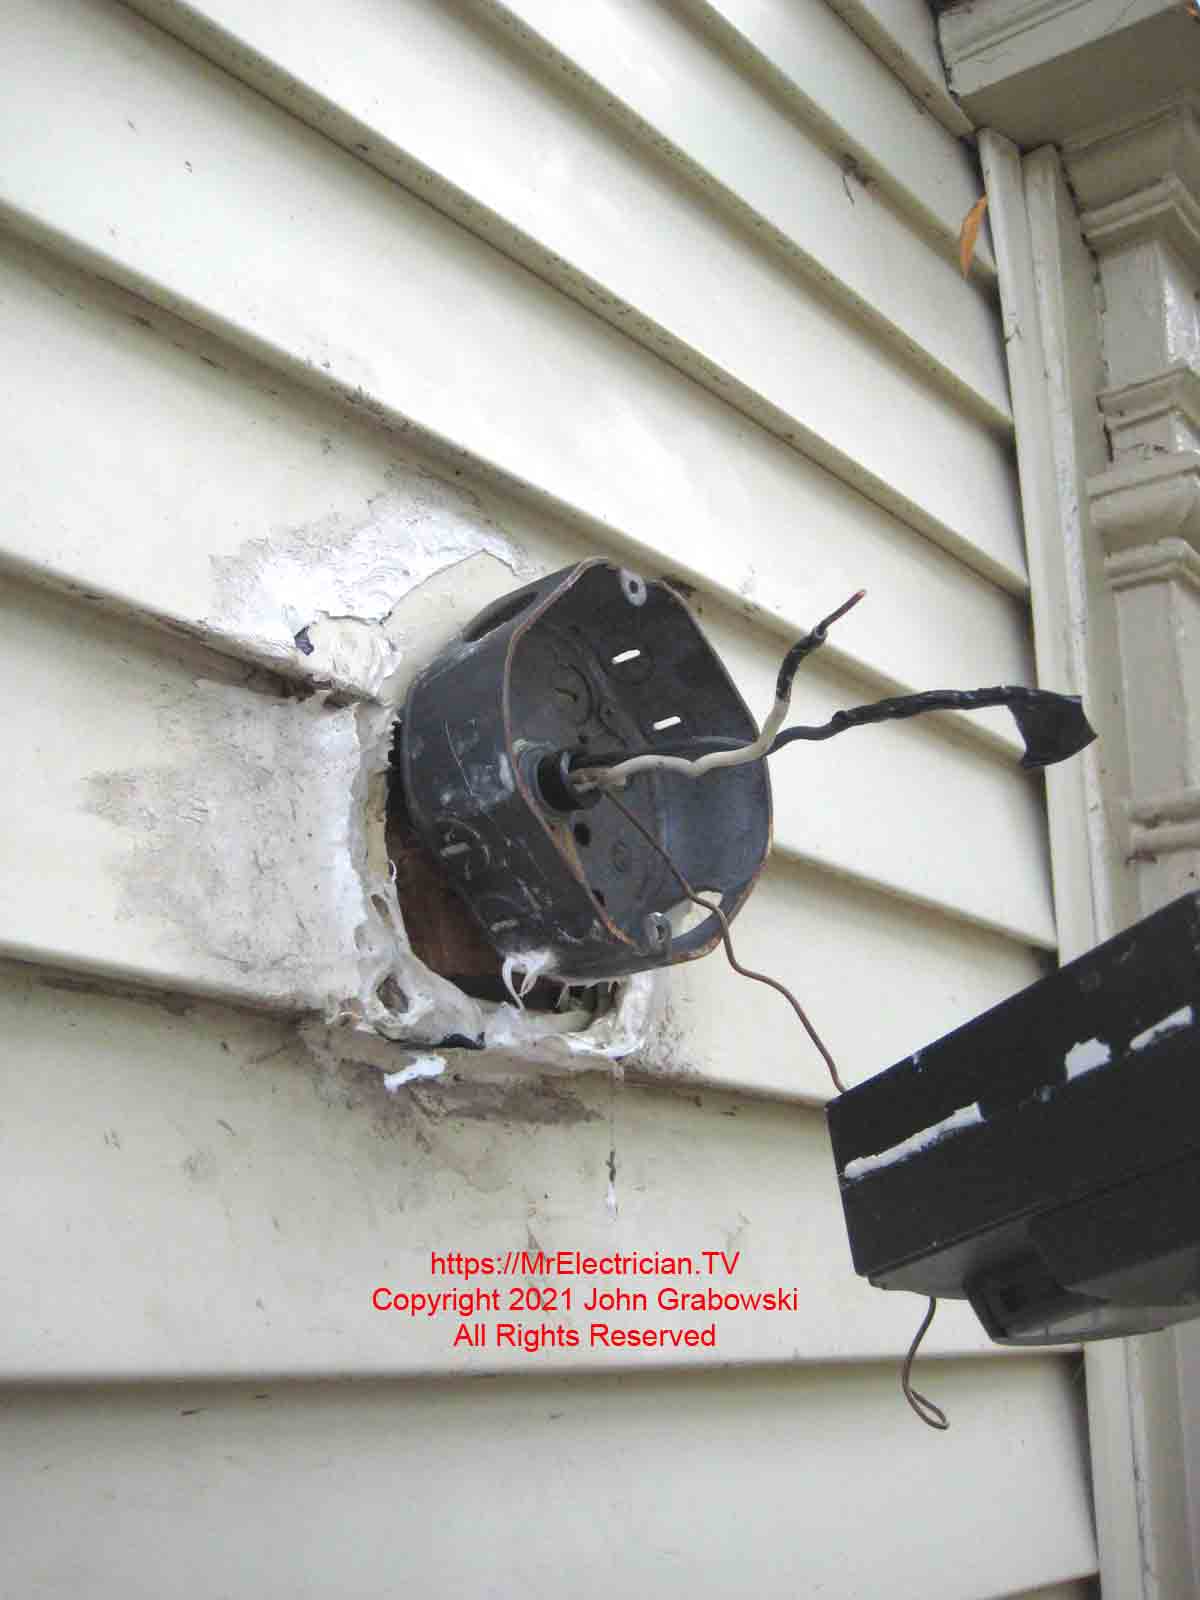 The old light fixture, duct tape, and caulk is removed to reveal an indoor electrical box with some of the knockouts removed